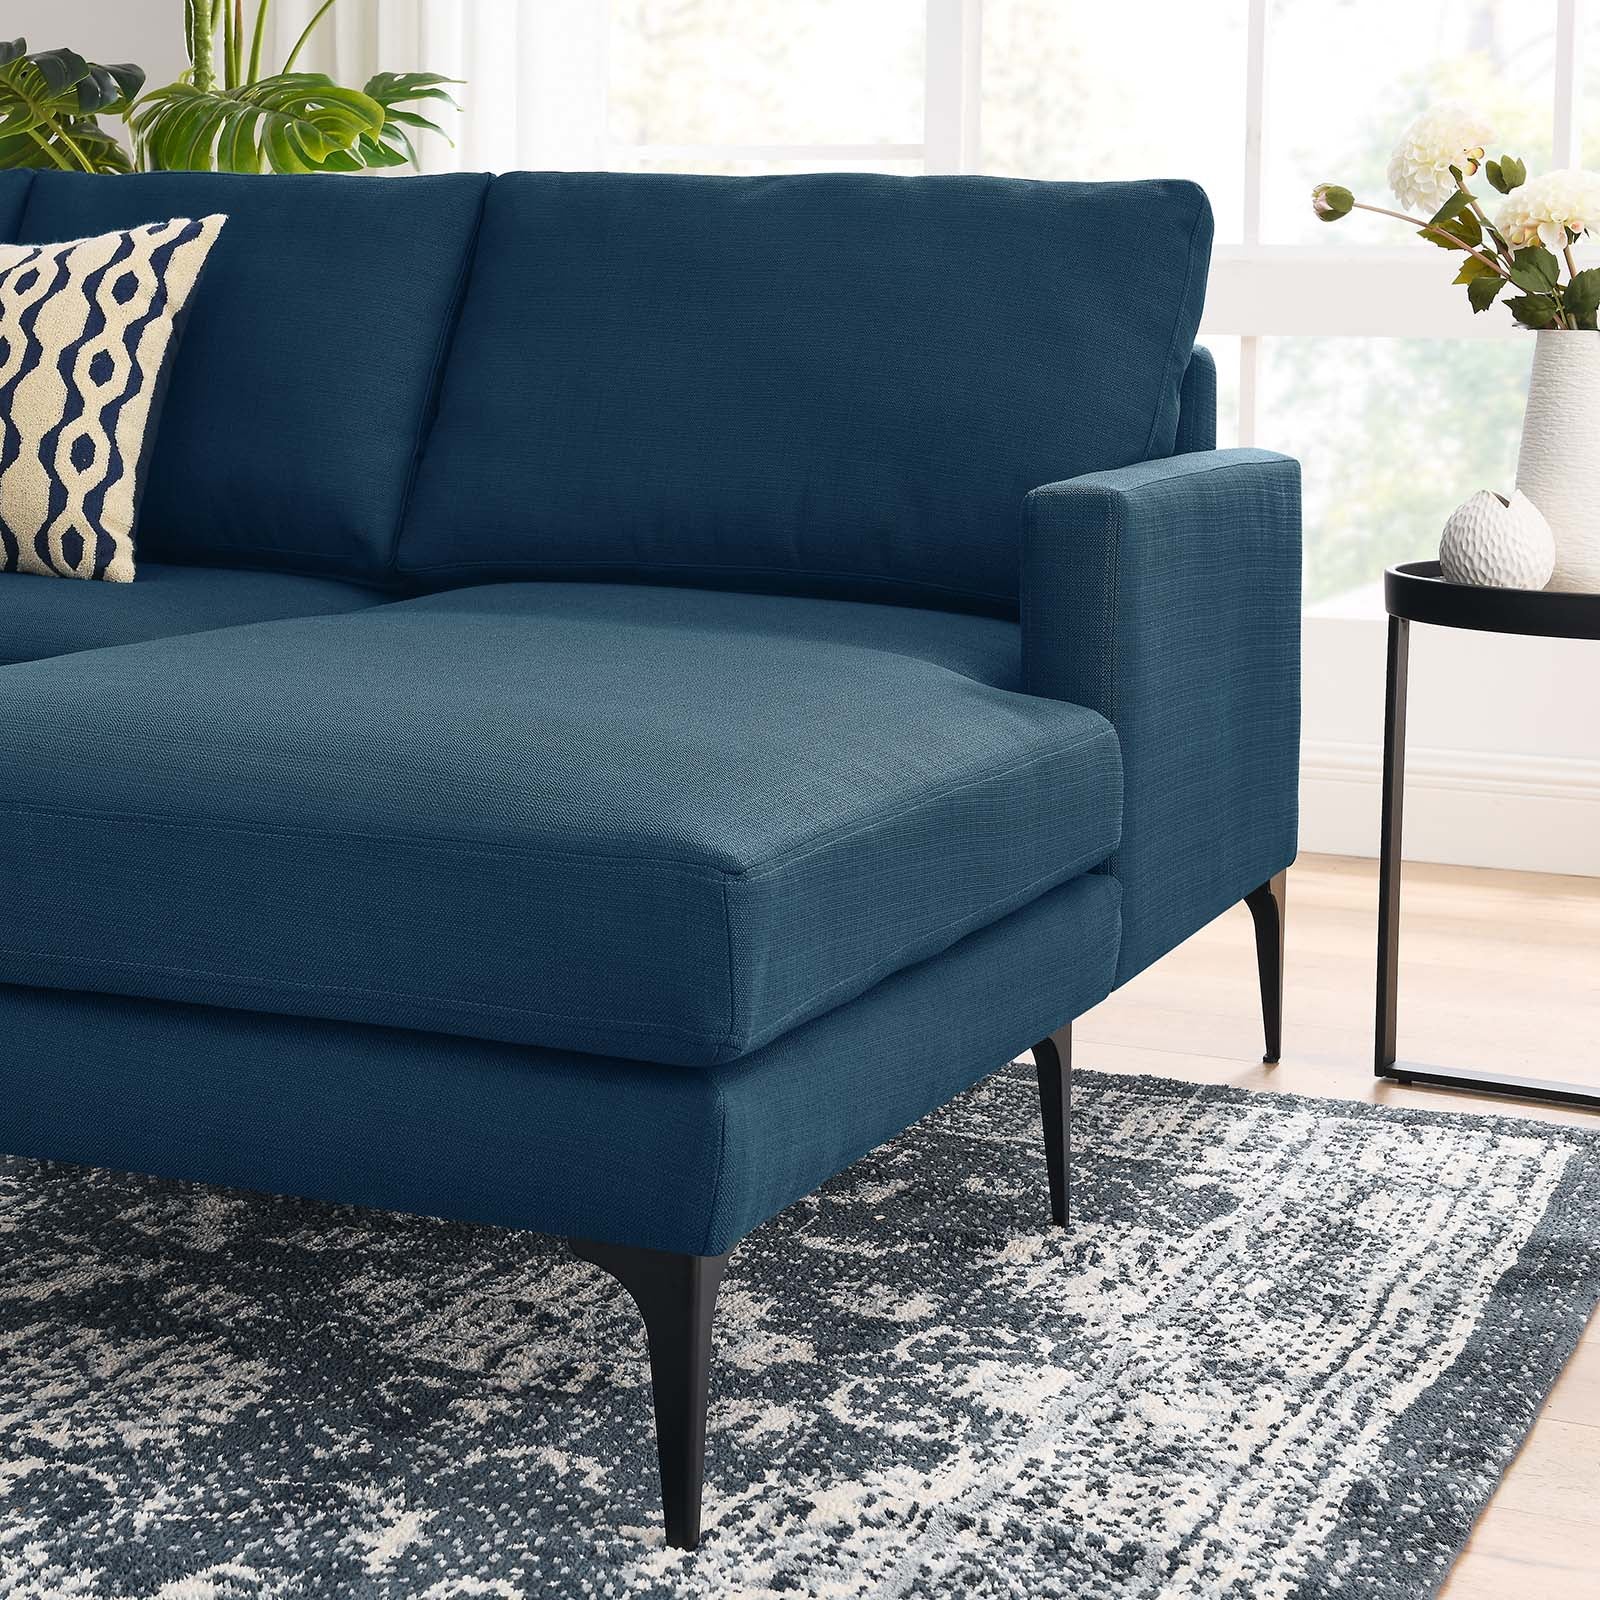 Evermore Right-Facing Upholstered Fabric Sectional Sofa